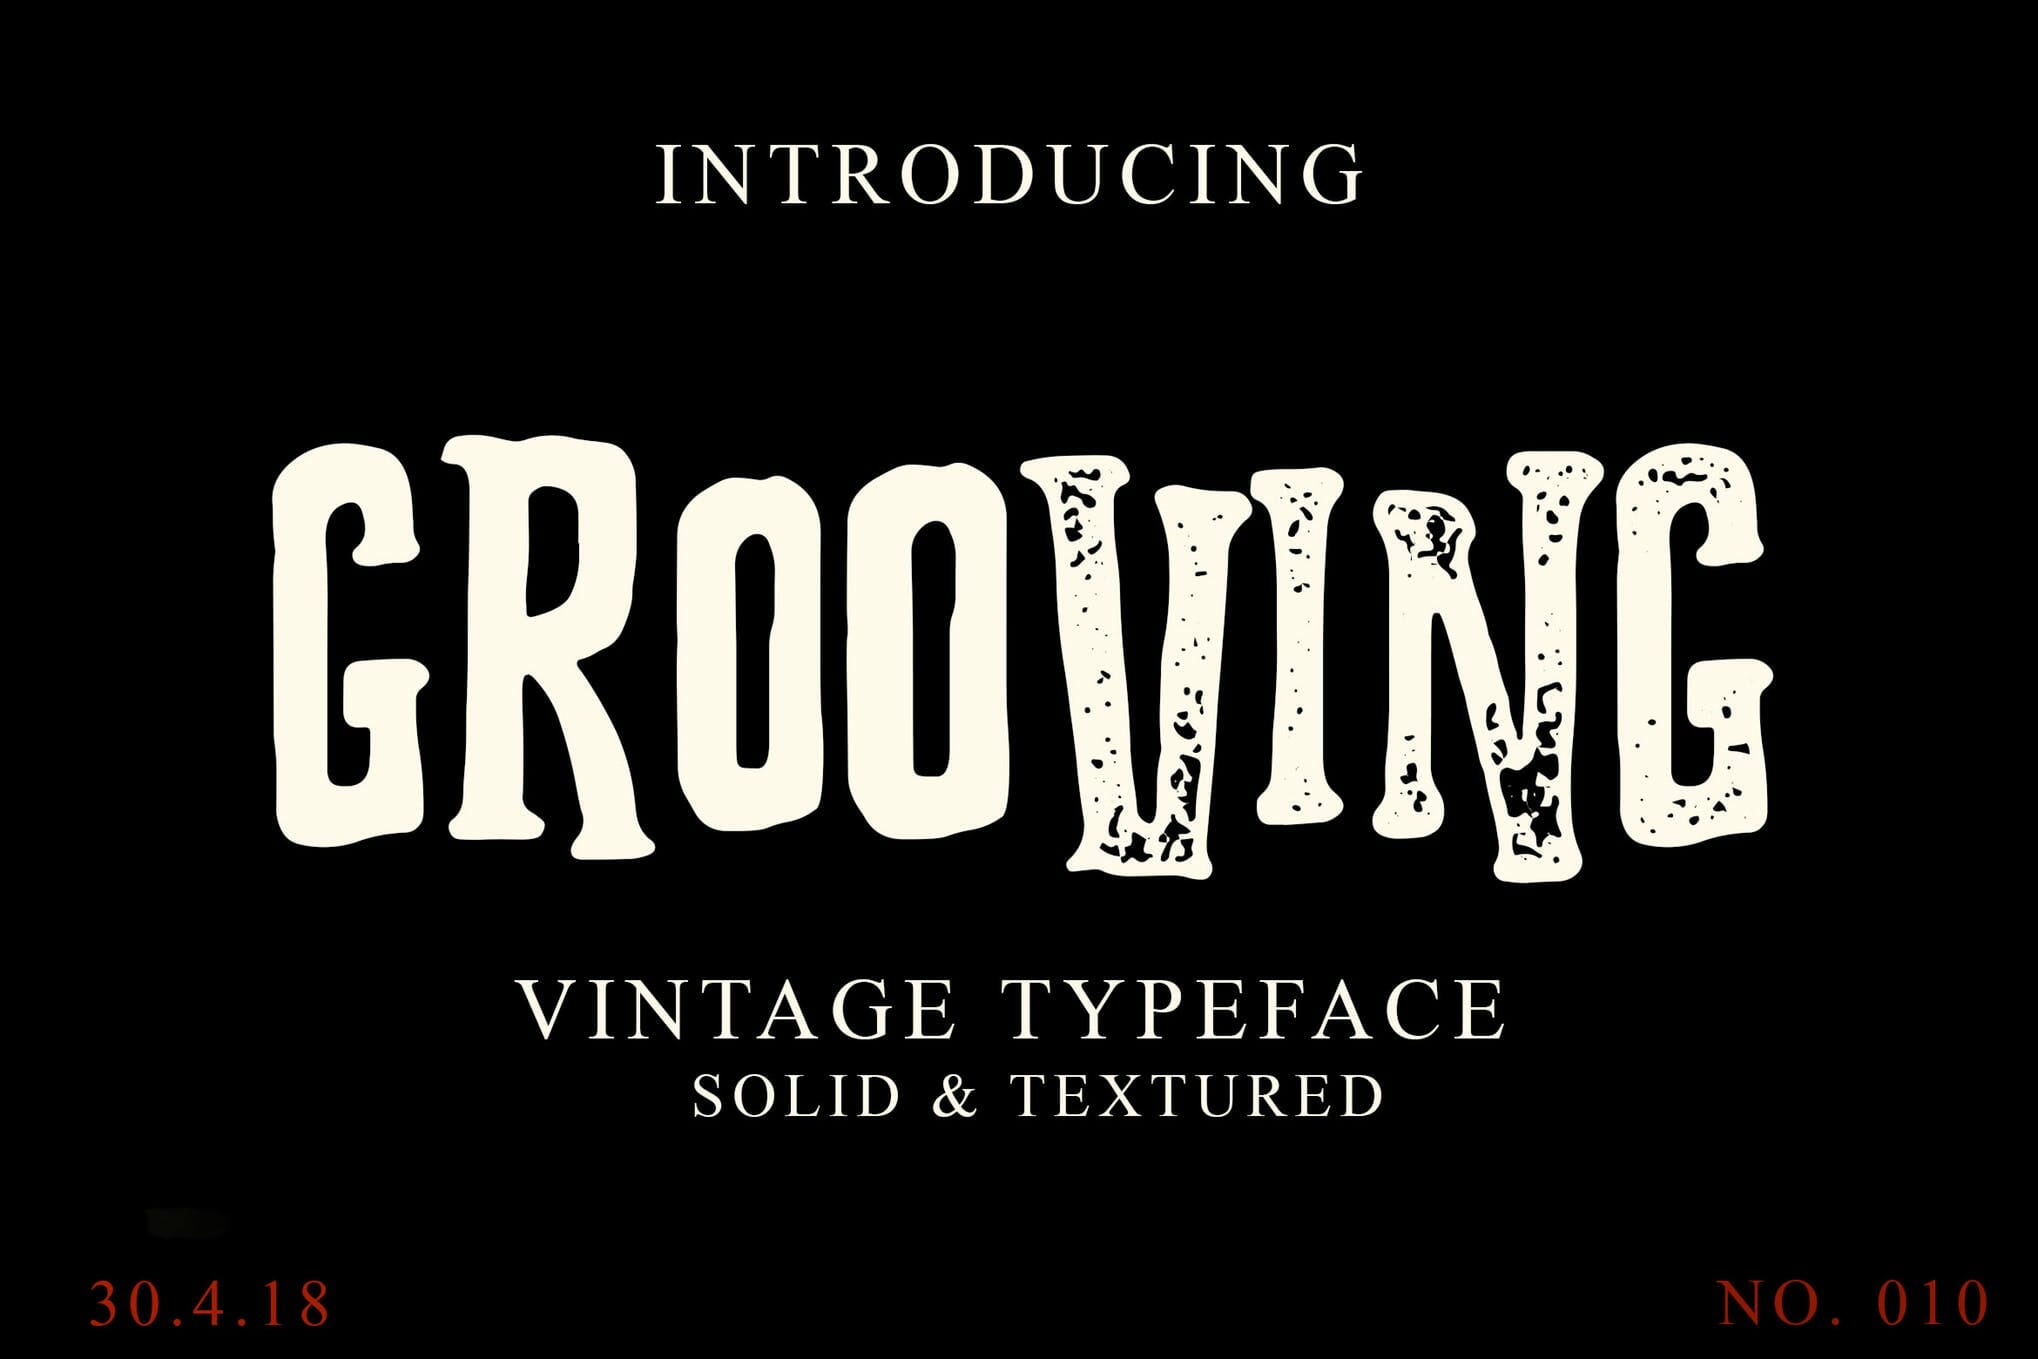 Introducing Grooving Vintage Typeface Solid & Textured 30.4.18 NO.010 - Halloween Fonts for 2019